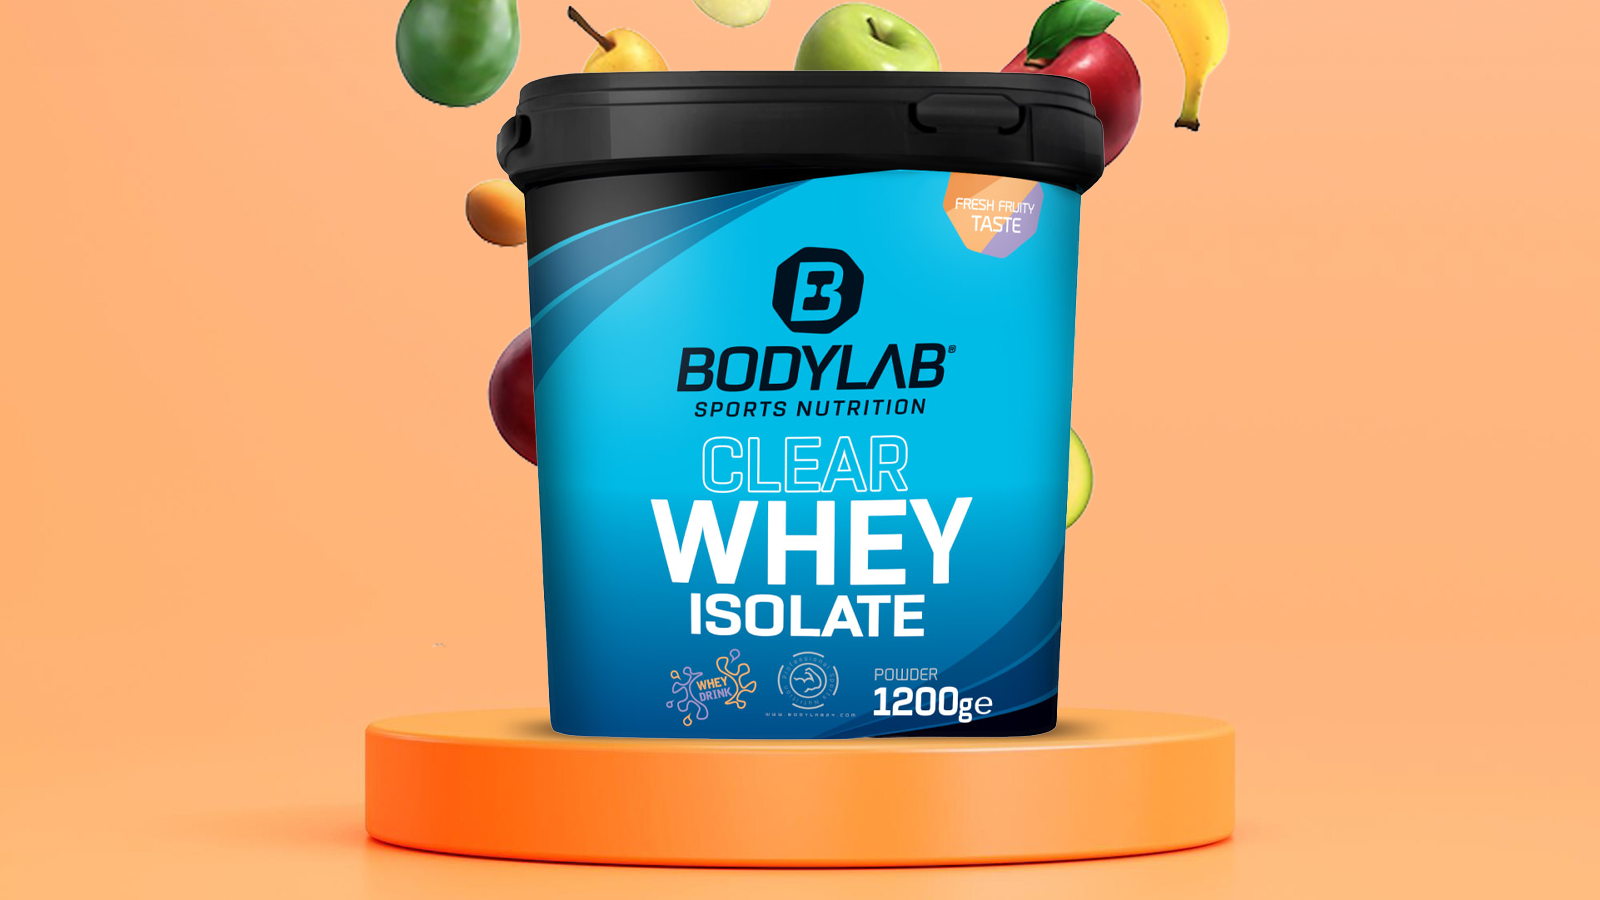 BodyLab24 Clear Whey Isolate (1200g)